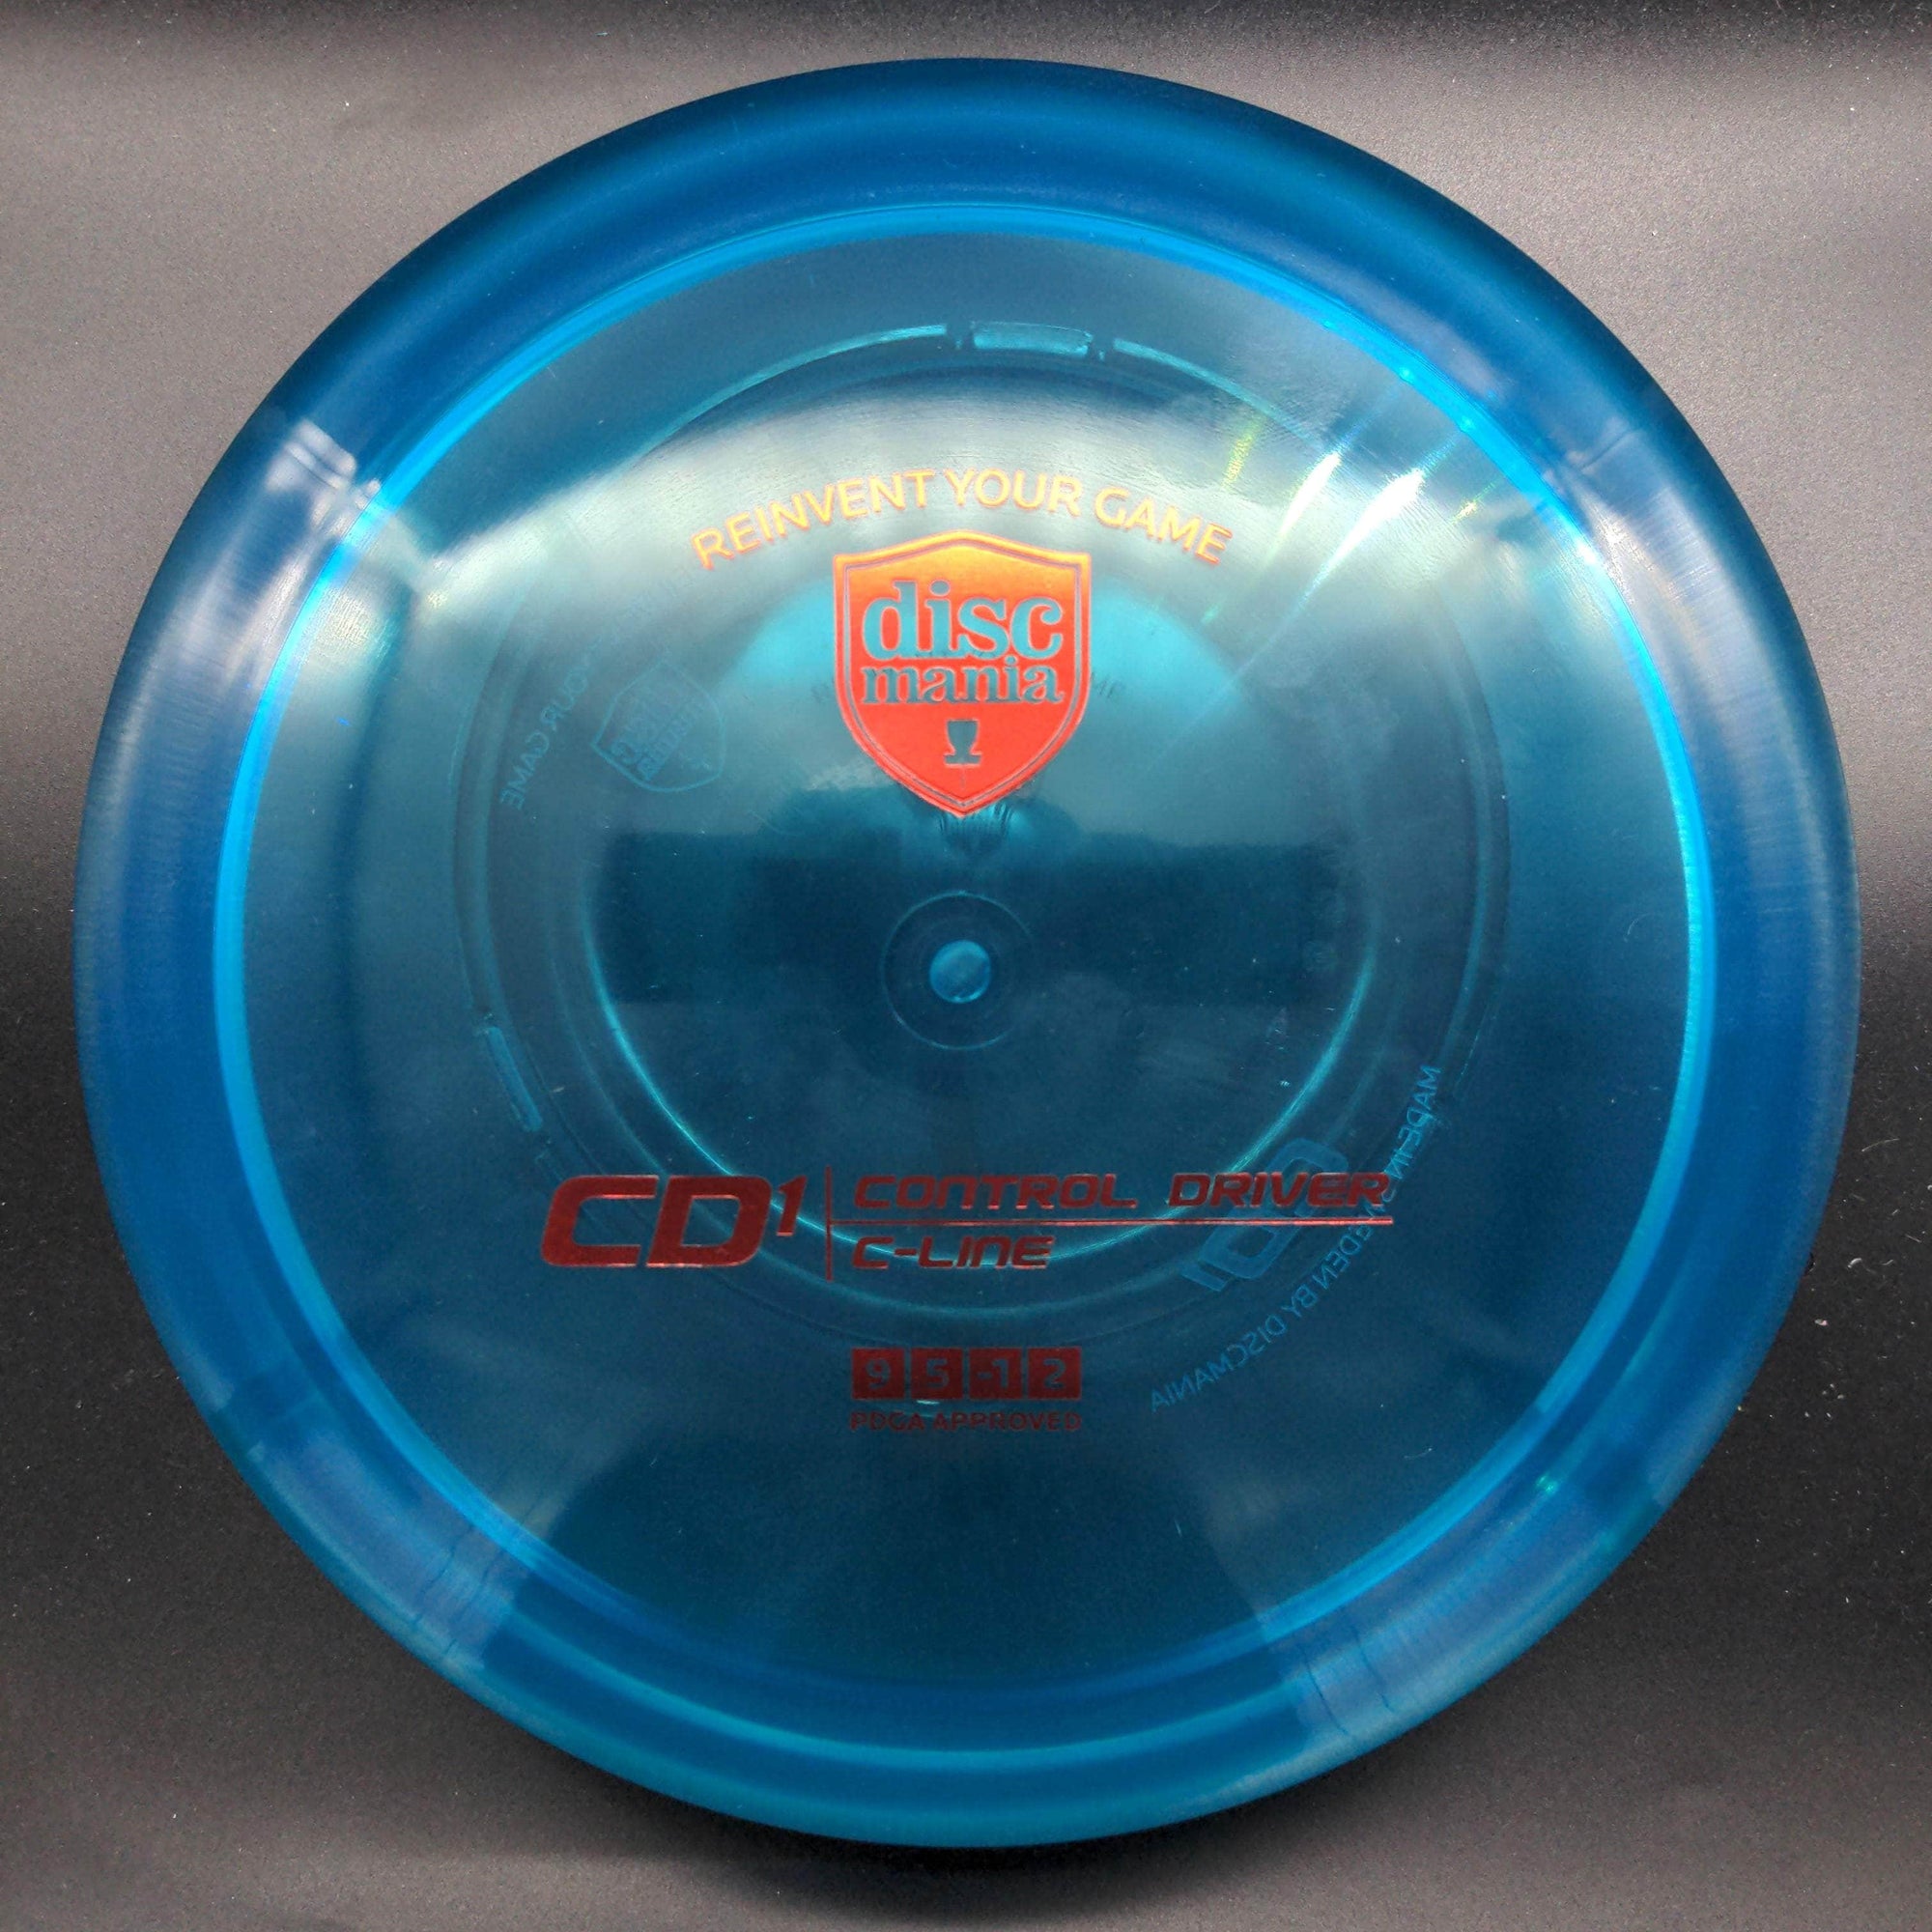 Discmania Distance Driver Blue Red Stamp 175g CD1, C-Line Plastic